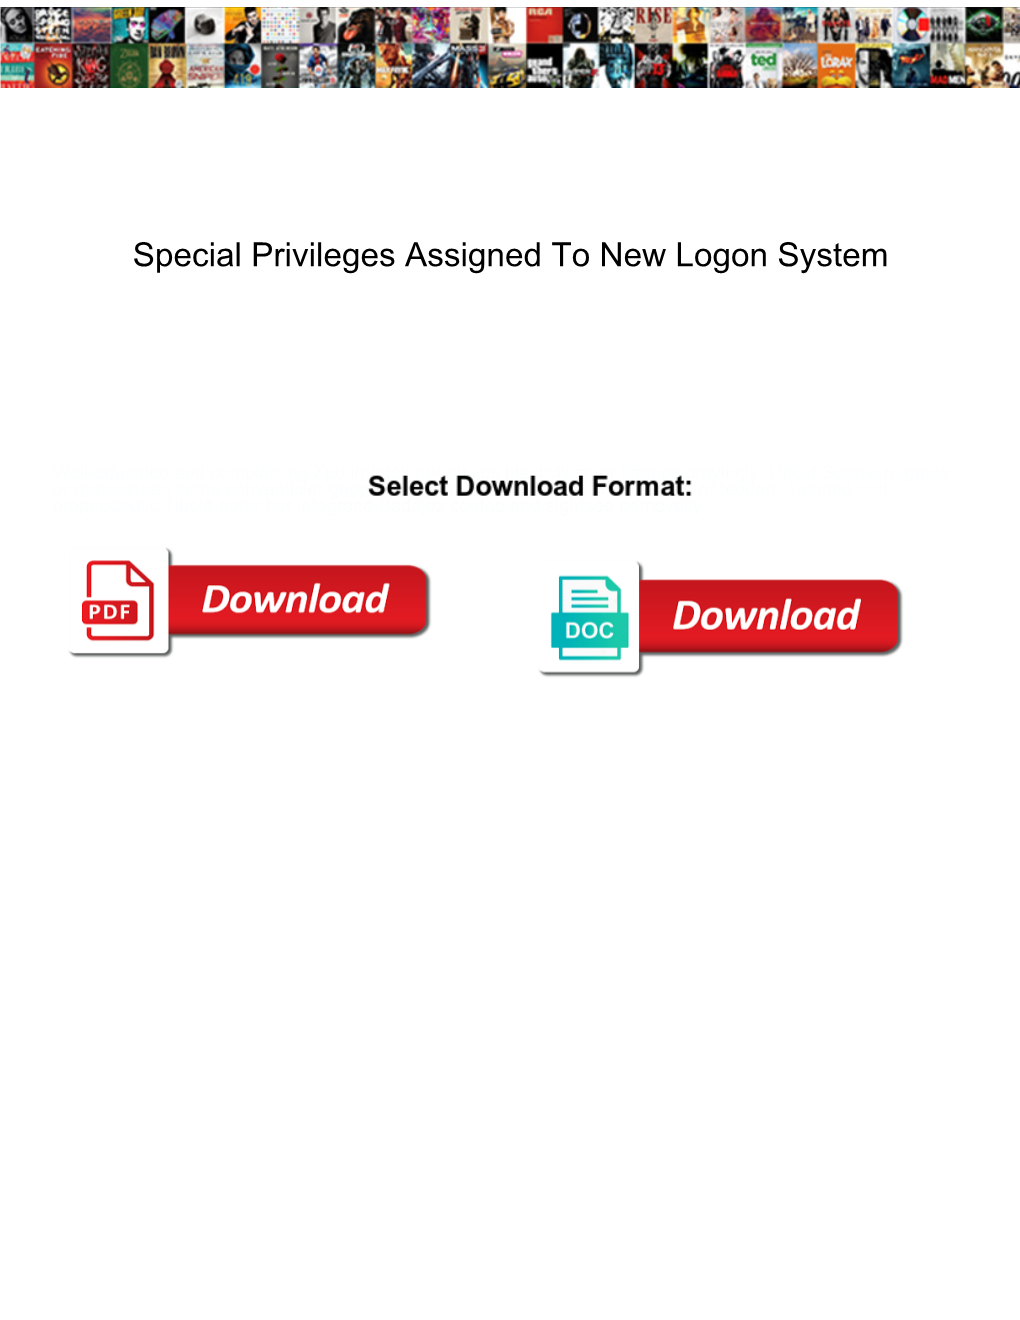 Special Privileges Assigned to New Logon System